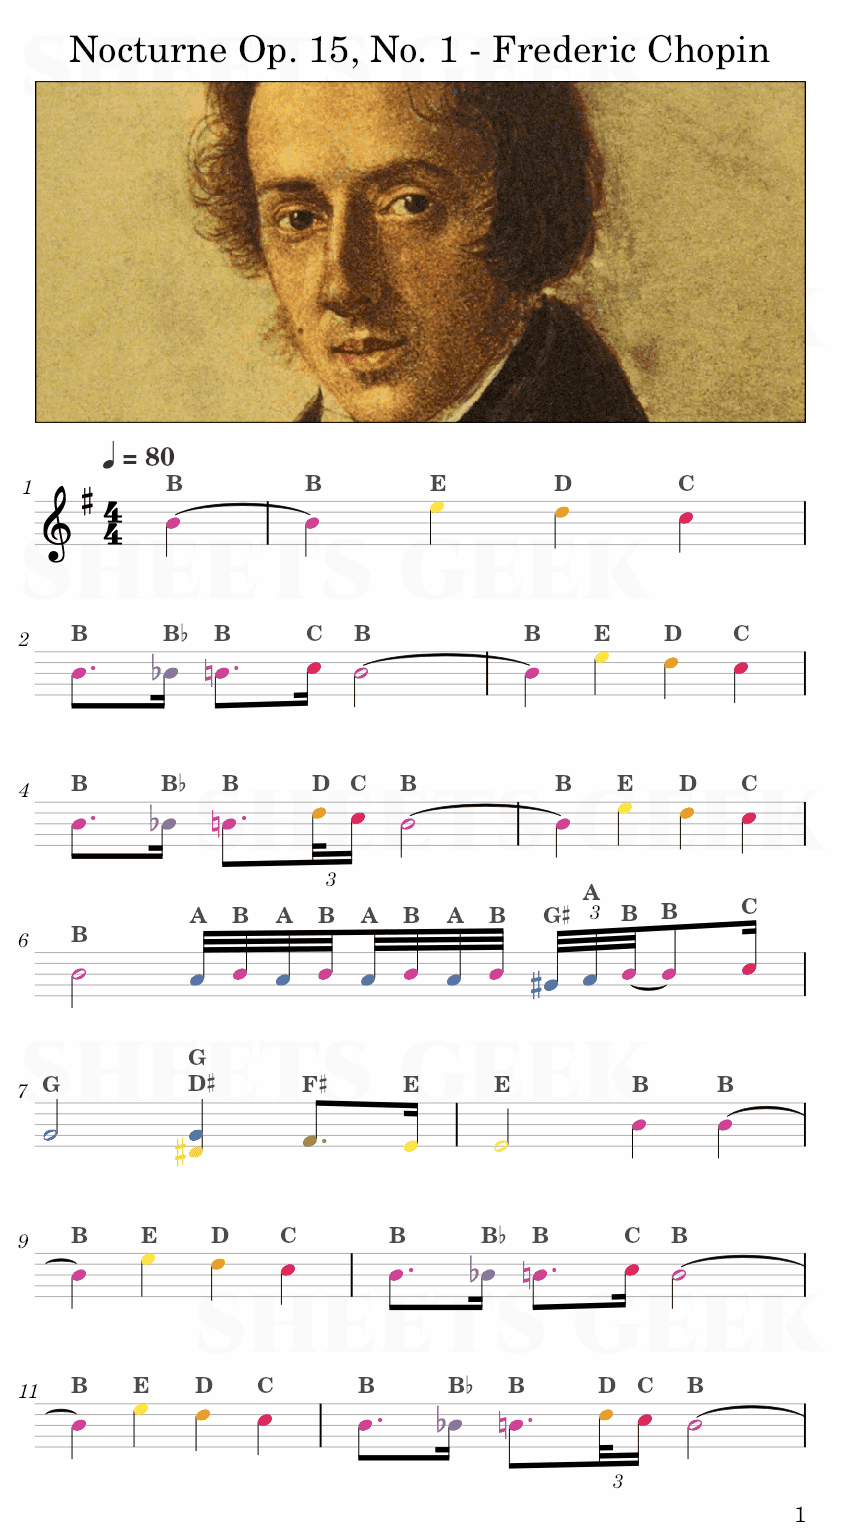 Nocturne Op. 15, No. 1 - Frederic Chopin Easy Sheet Music Free for piano, keyboard, flute, violin, sax, cello page 1